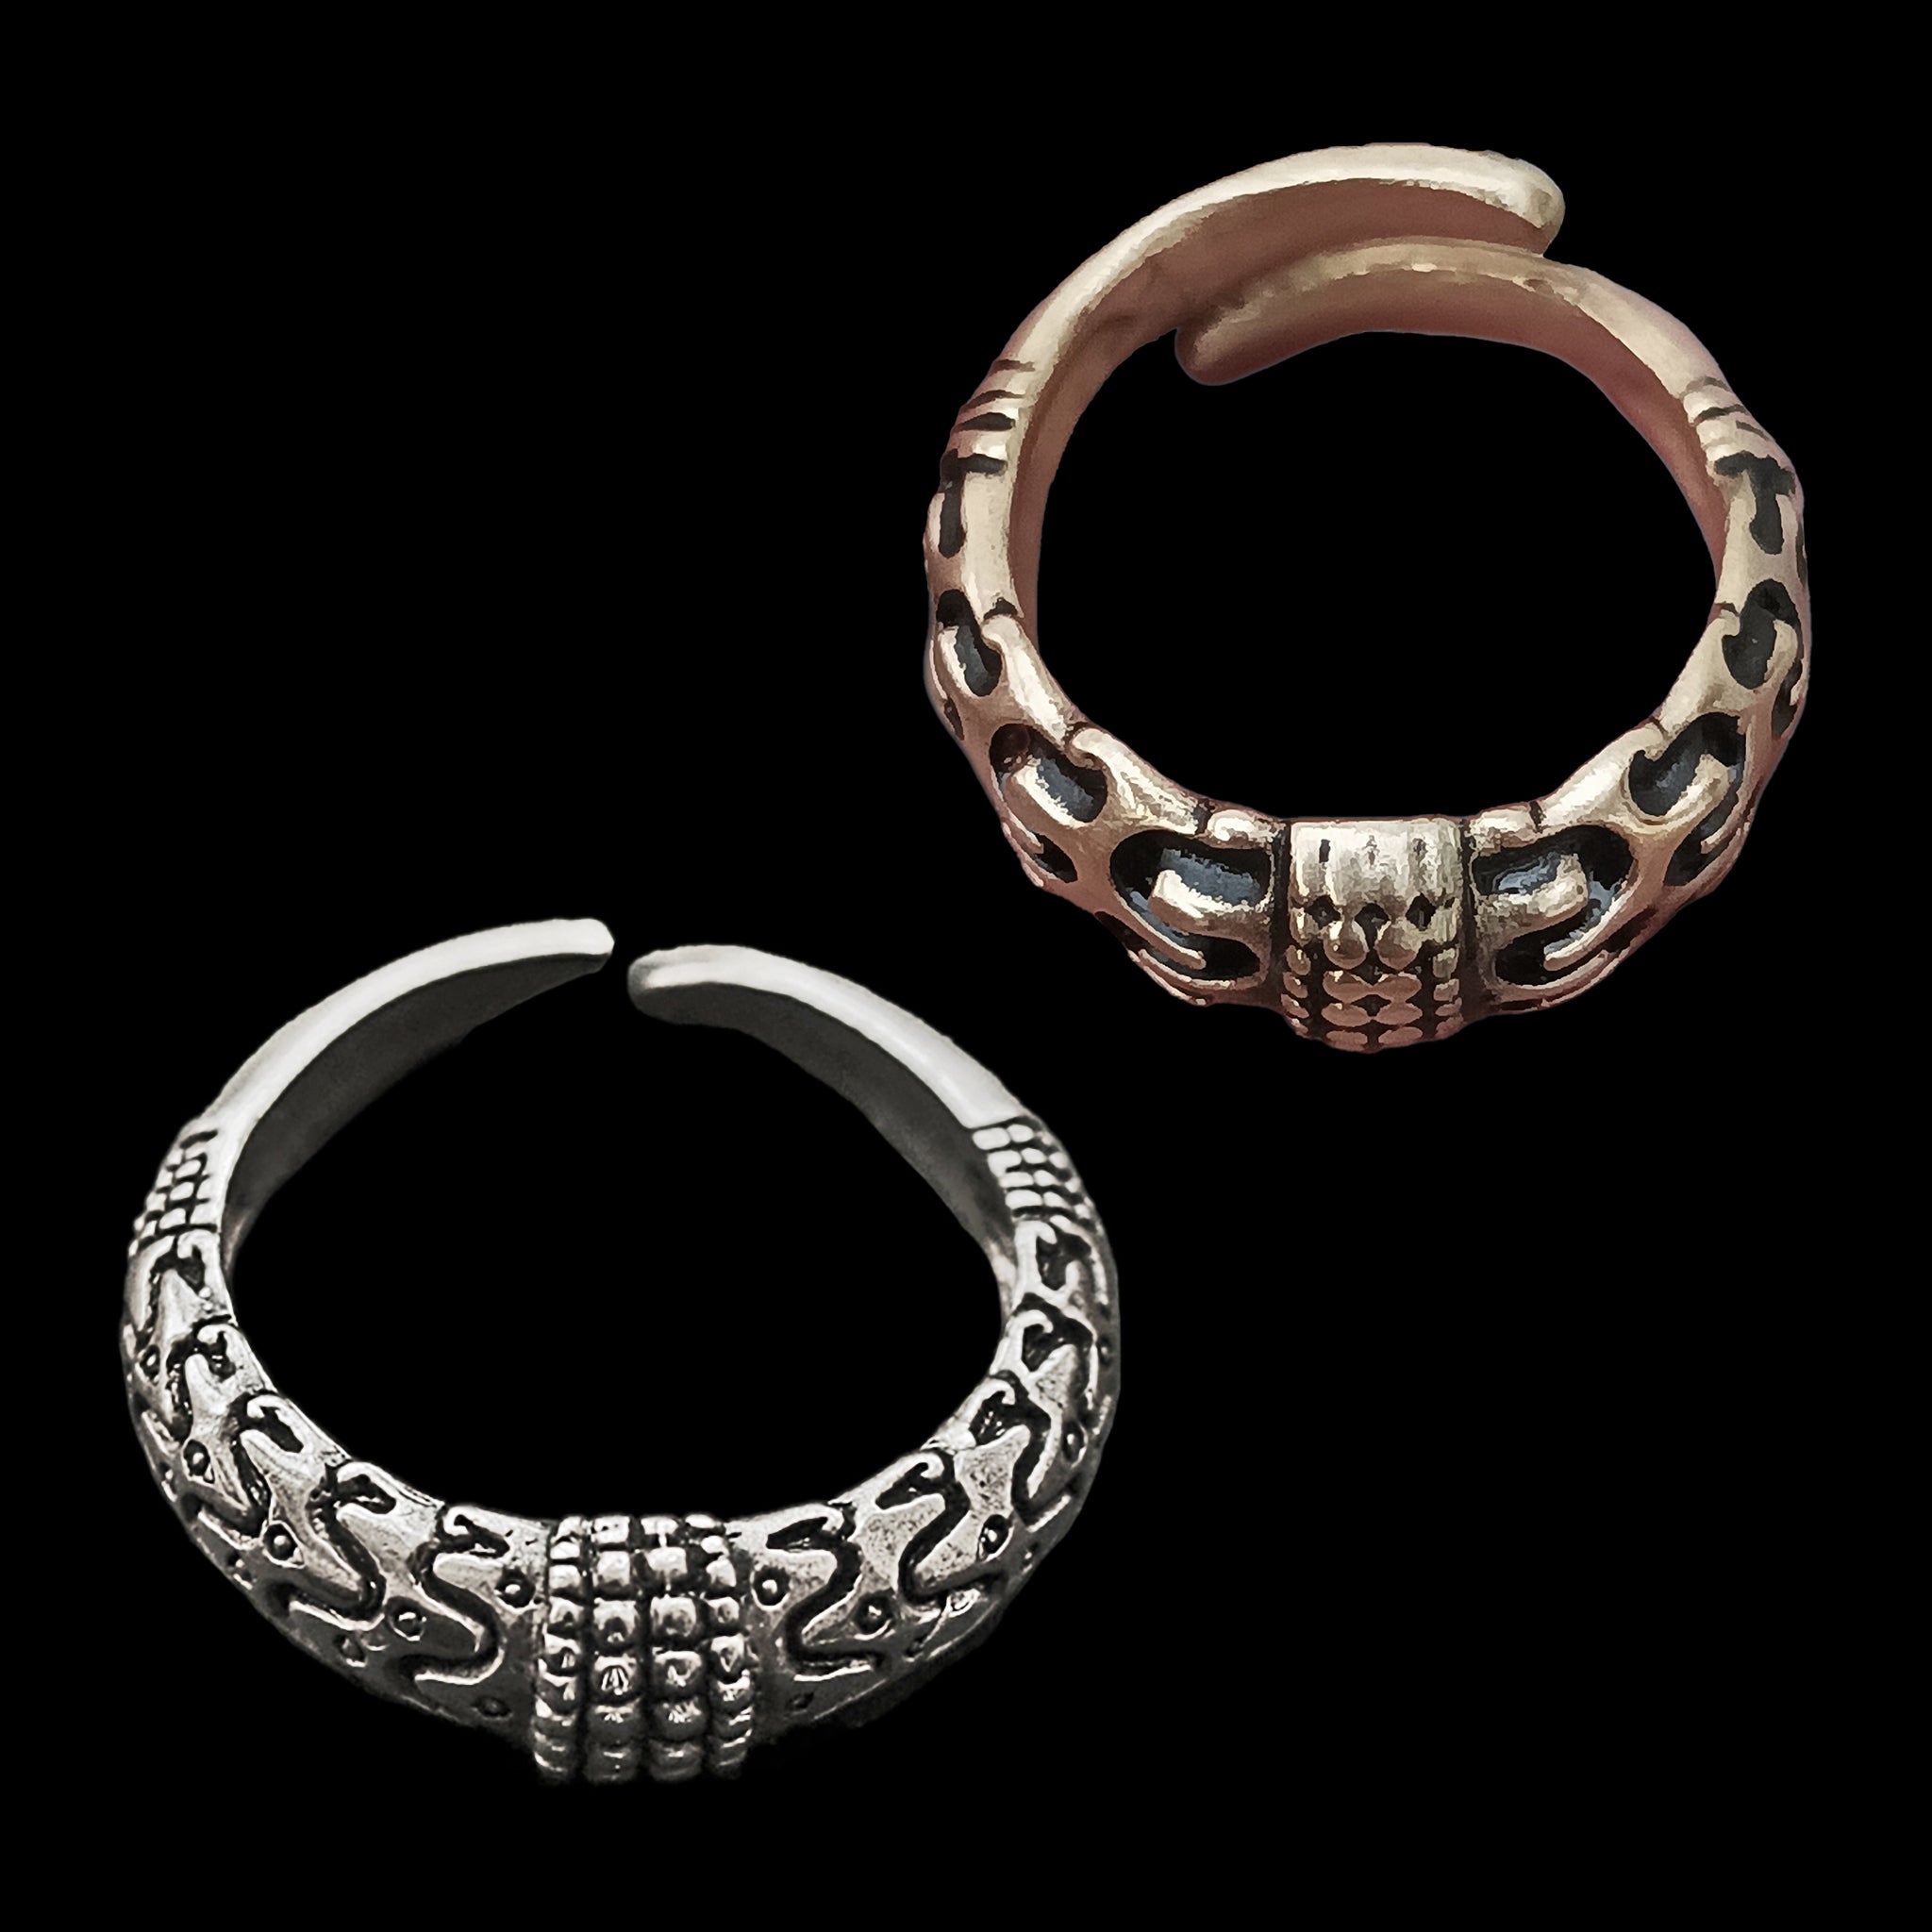 Replica Viking Rings from Orupgård, Falster, Denmark in Silver and Bronze